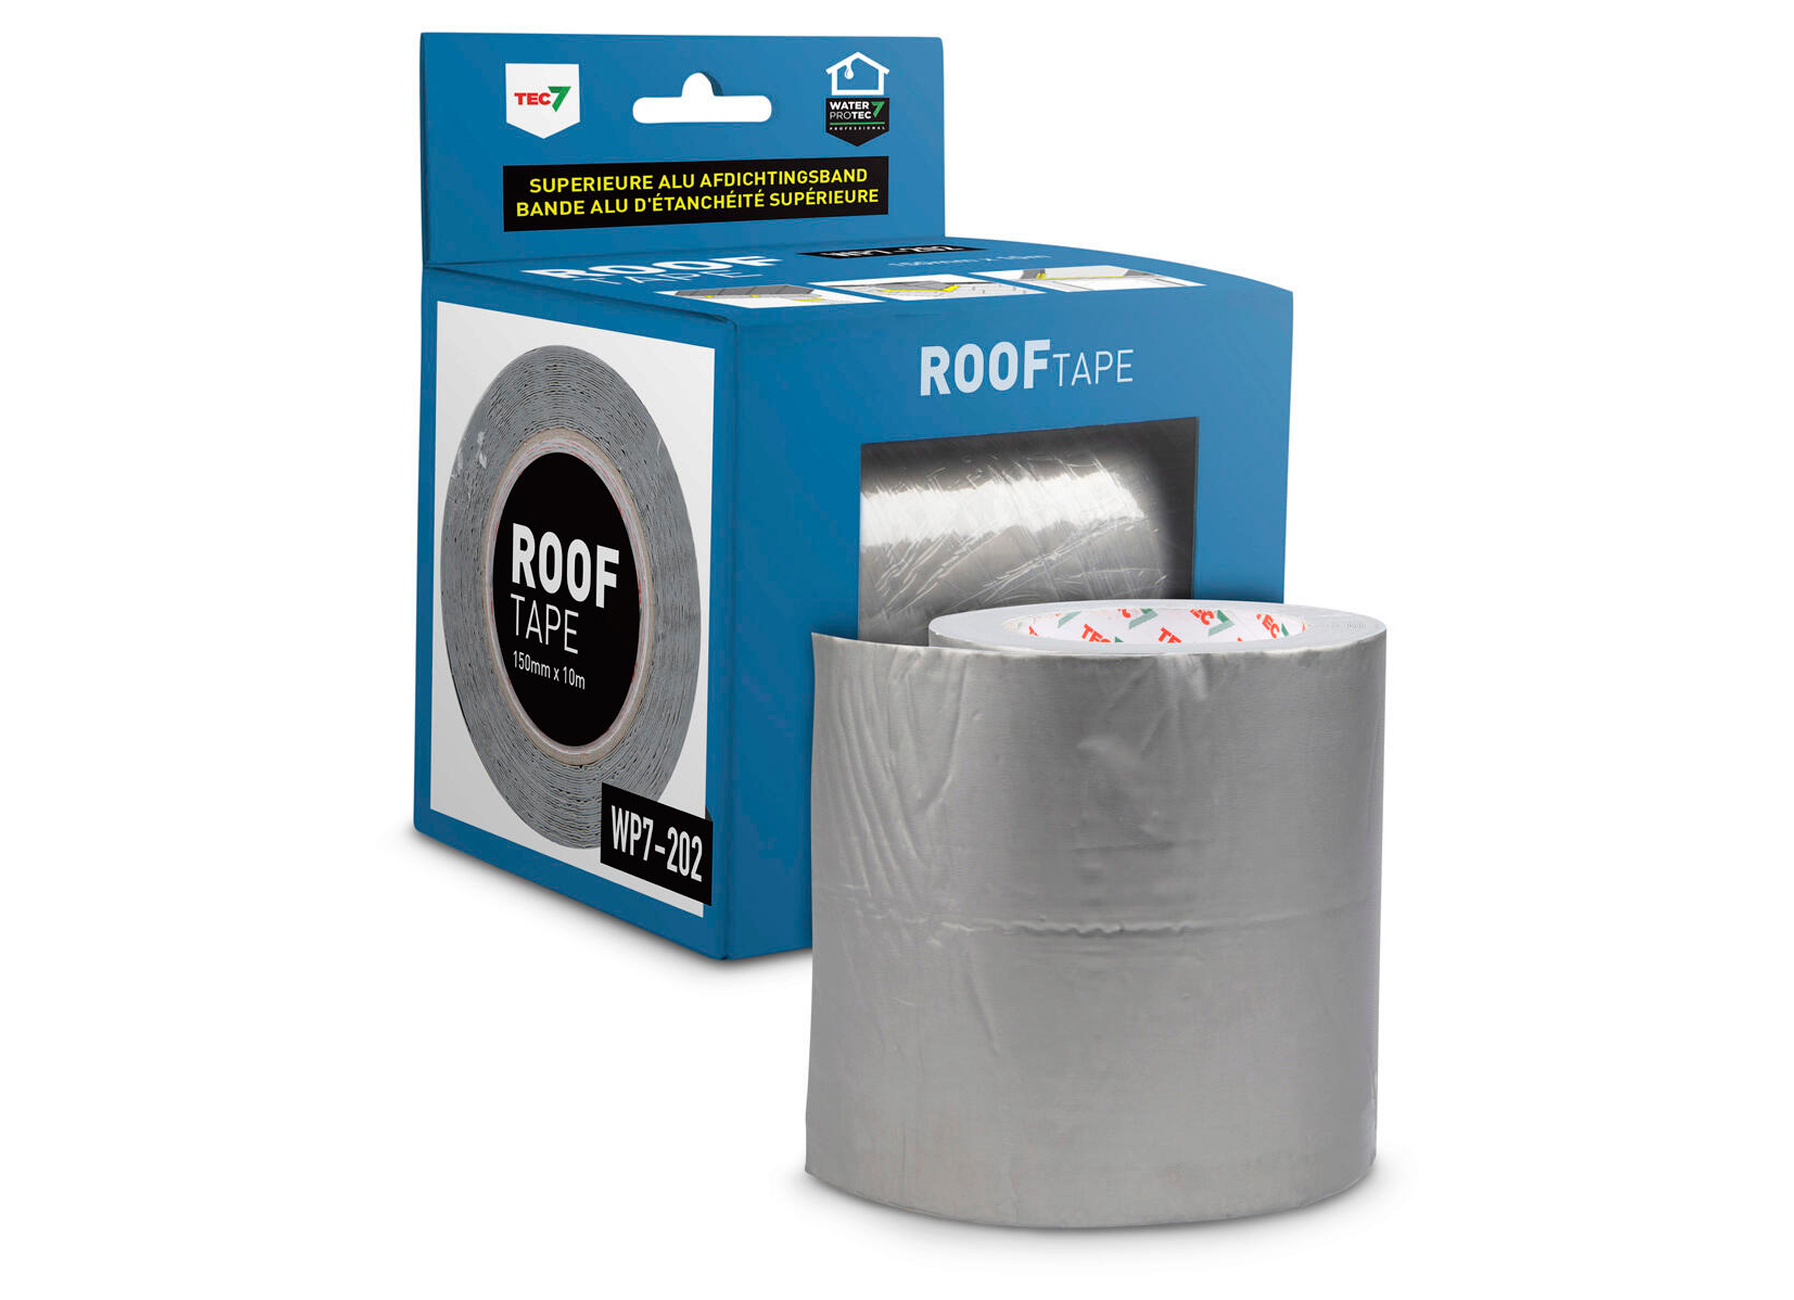 WP7-202 ROOF TAPE